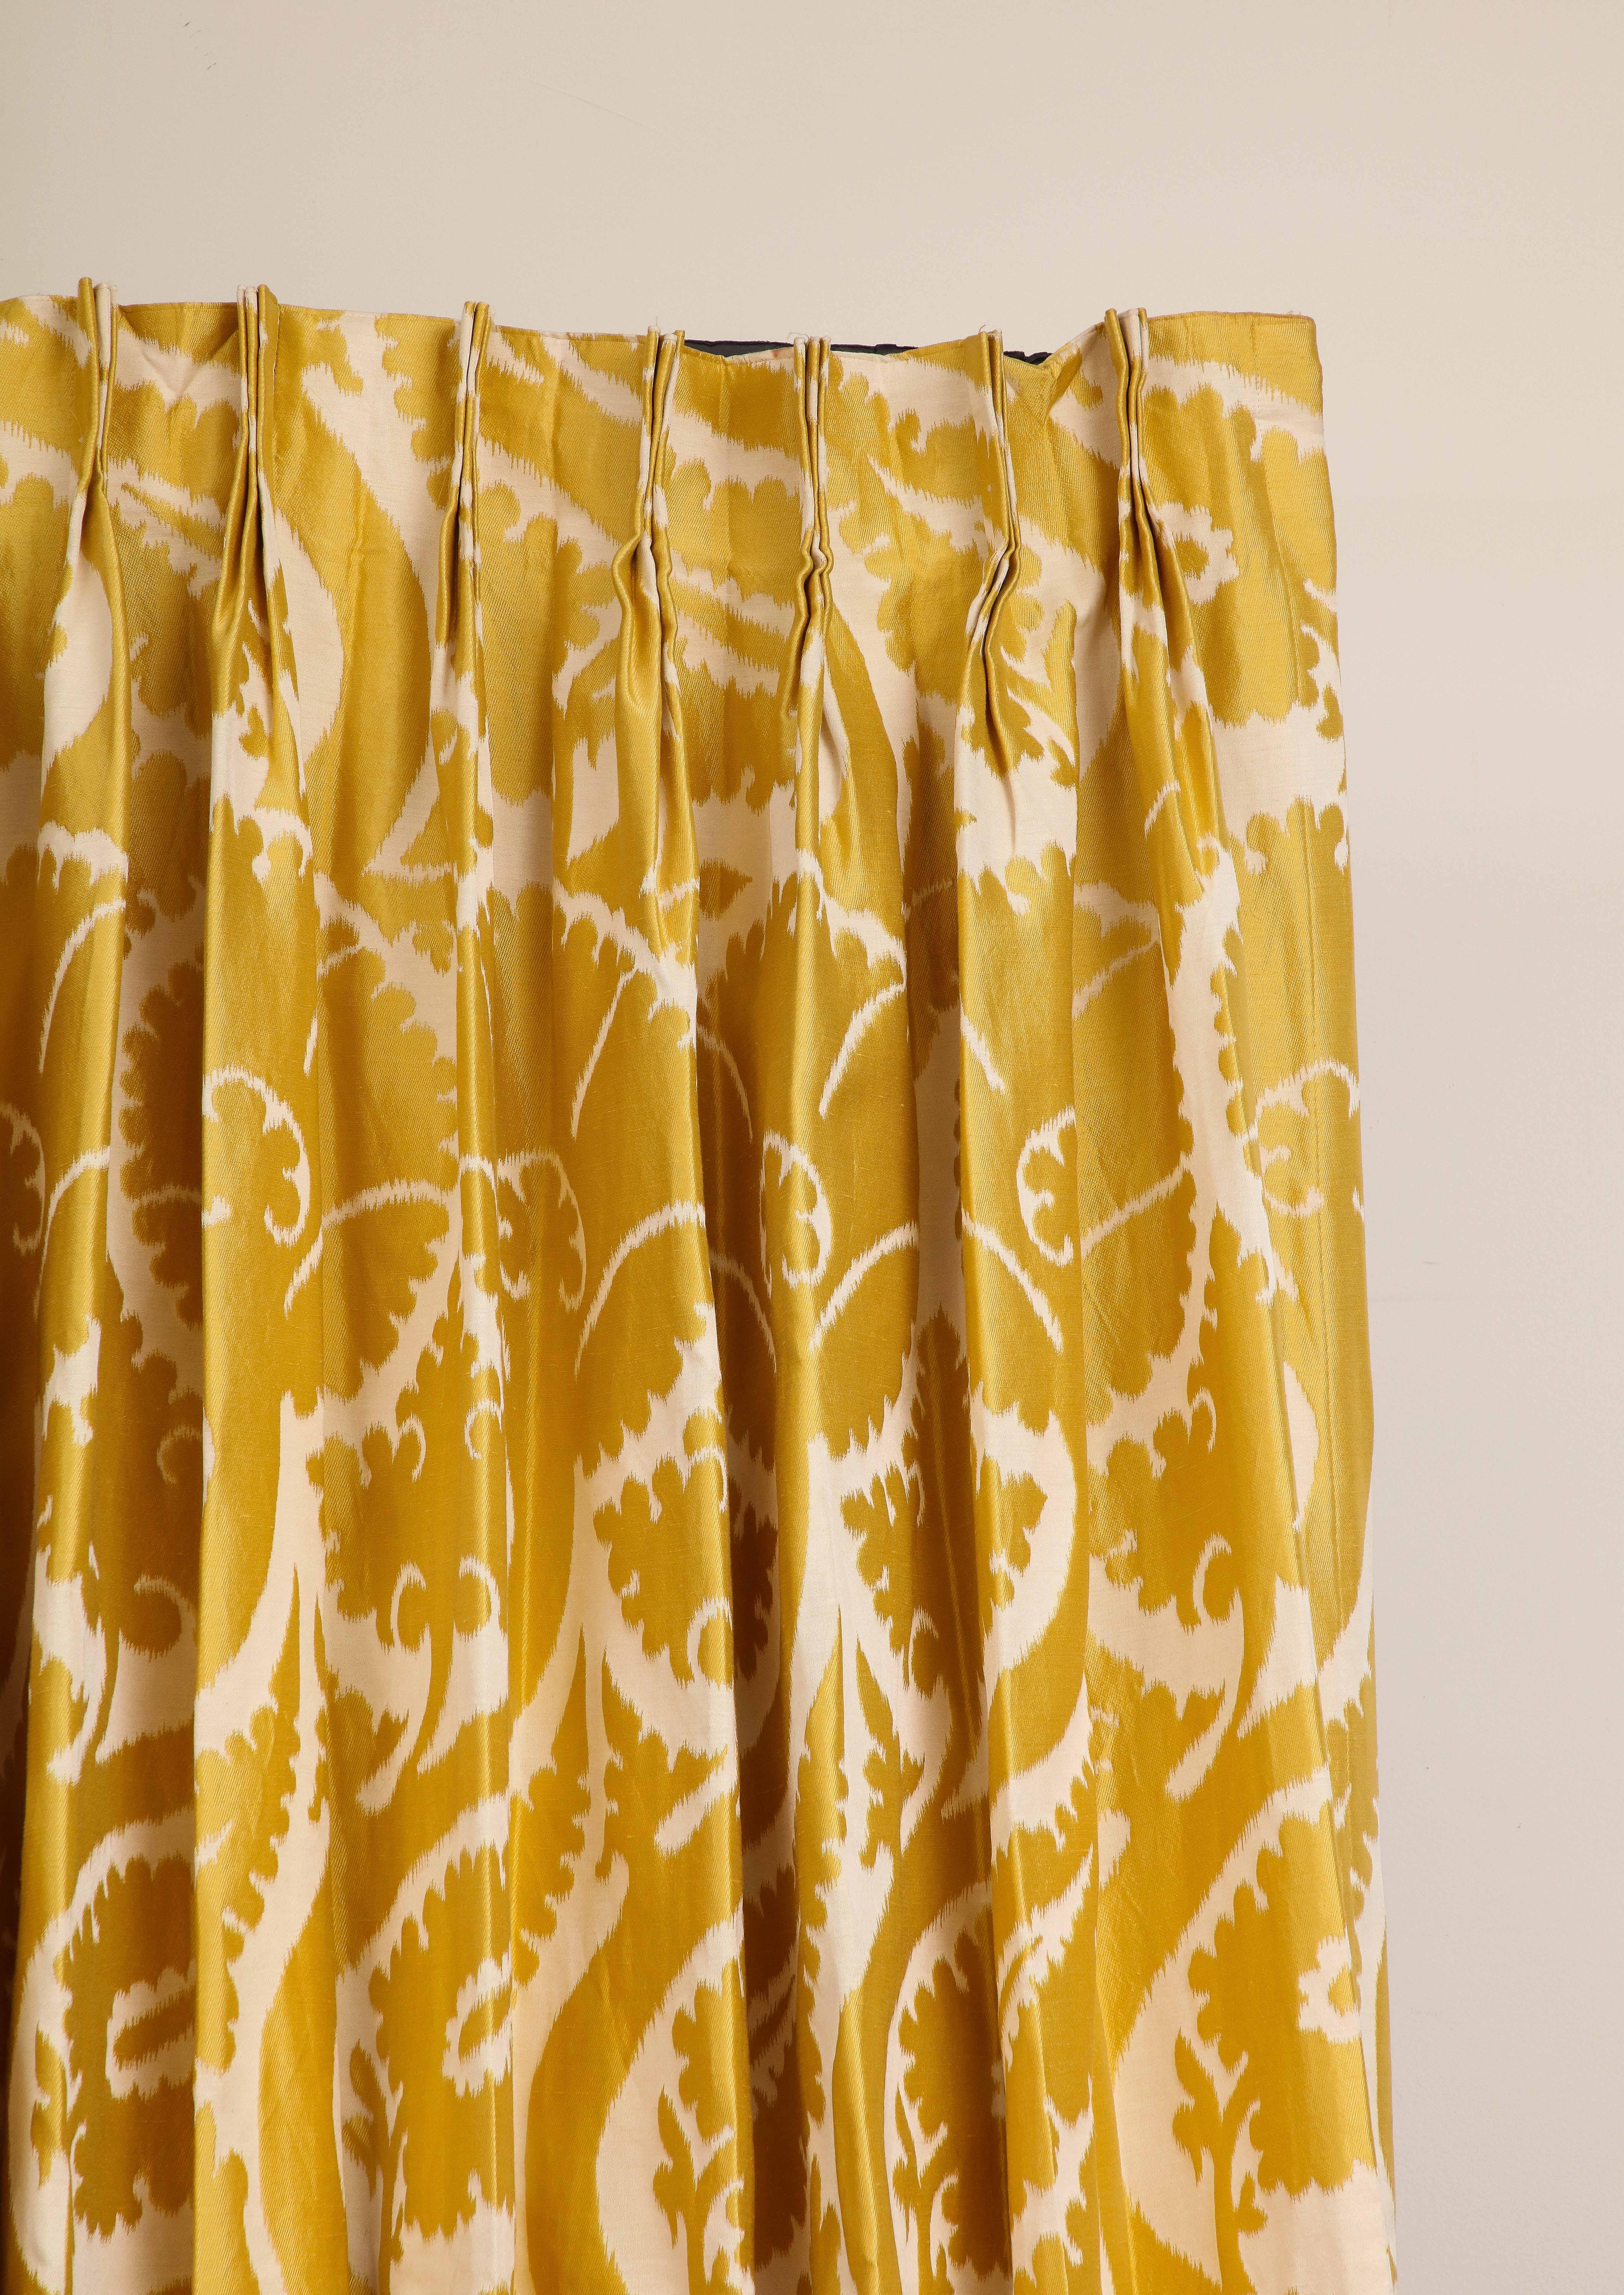 A pair (2 panels) of custom privacy-lined drapes in Pierre Frey Sidonia Girasole 2 golden yellow fabric. The fabric has since been discontinued. The panels feature pinch pleats with a 5